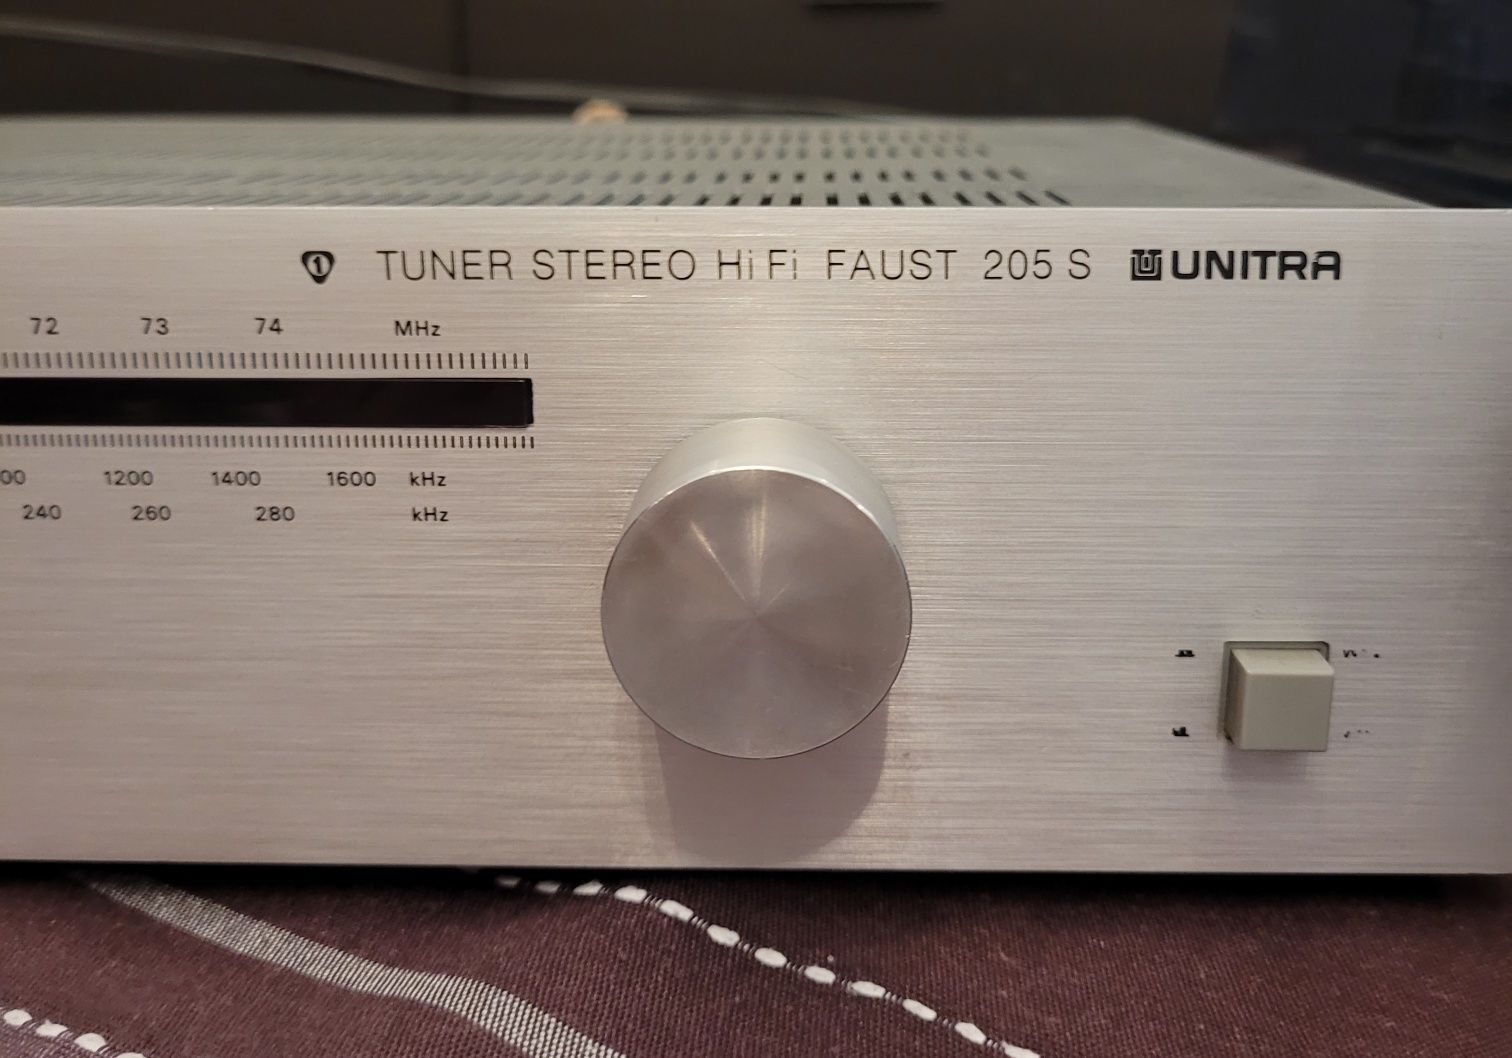 Tuner FAUST 205 S